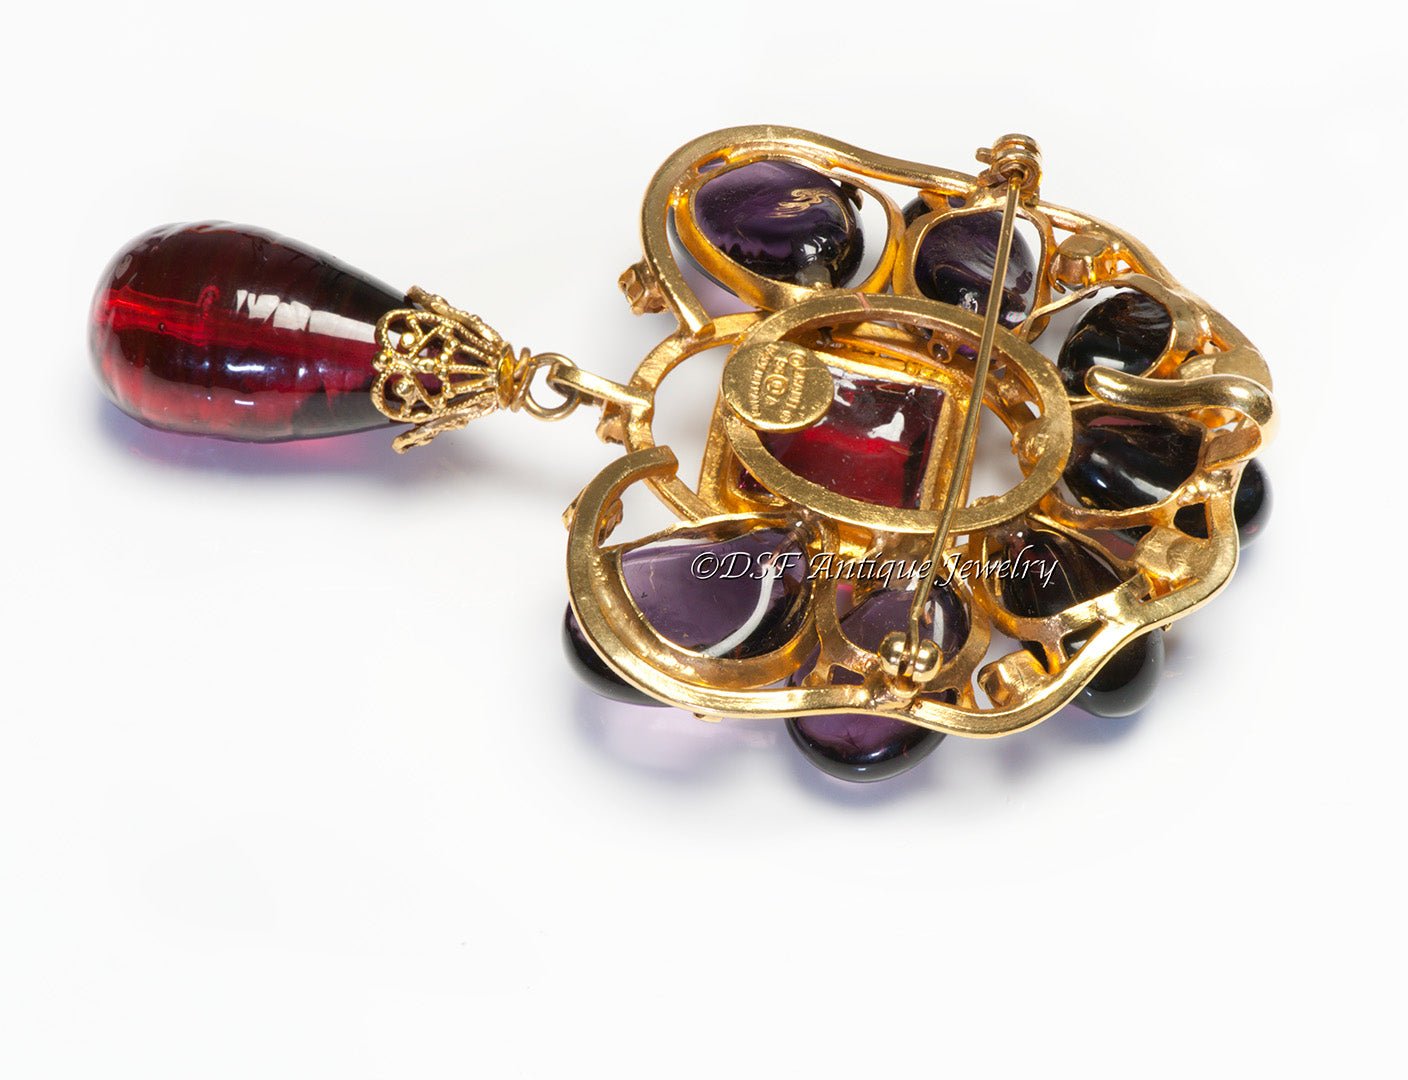 Chanel Paris Fall 1996 Maison Gripoix Purple Red Poured Glass Pendant Brooch - DSF Antique Jewelry